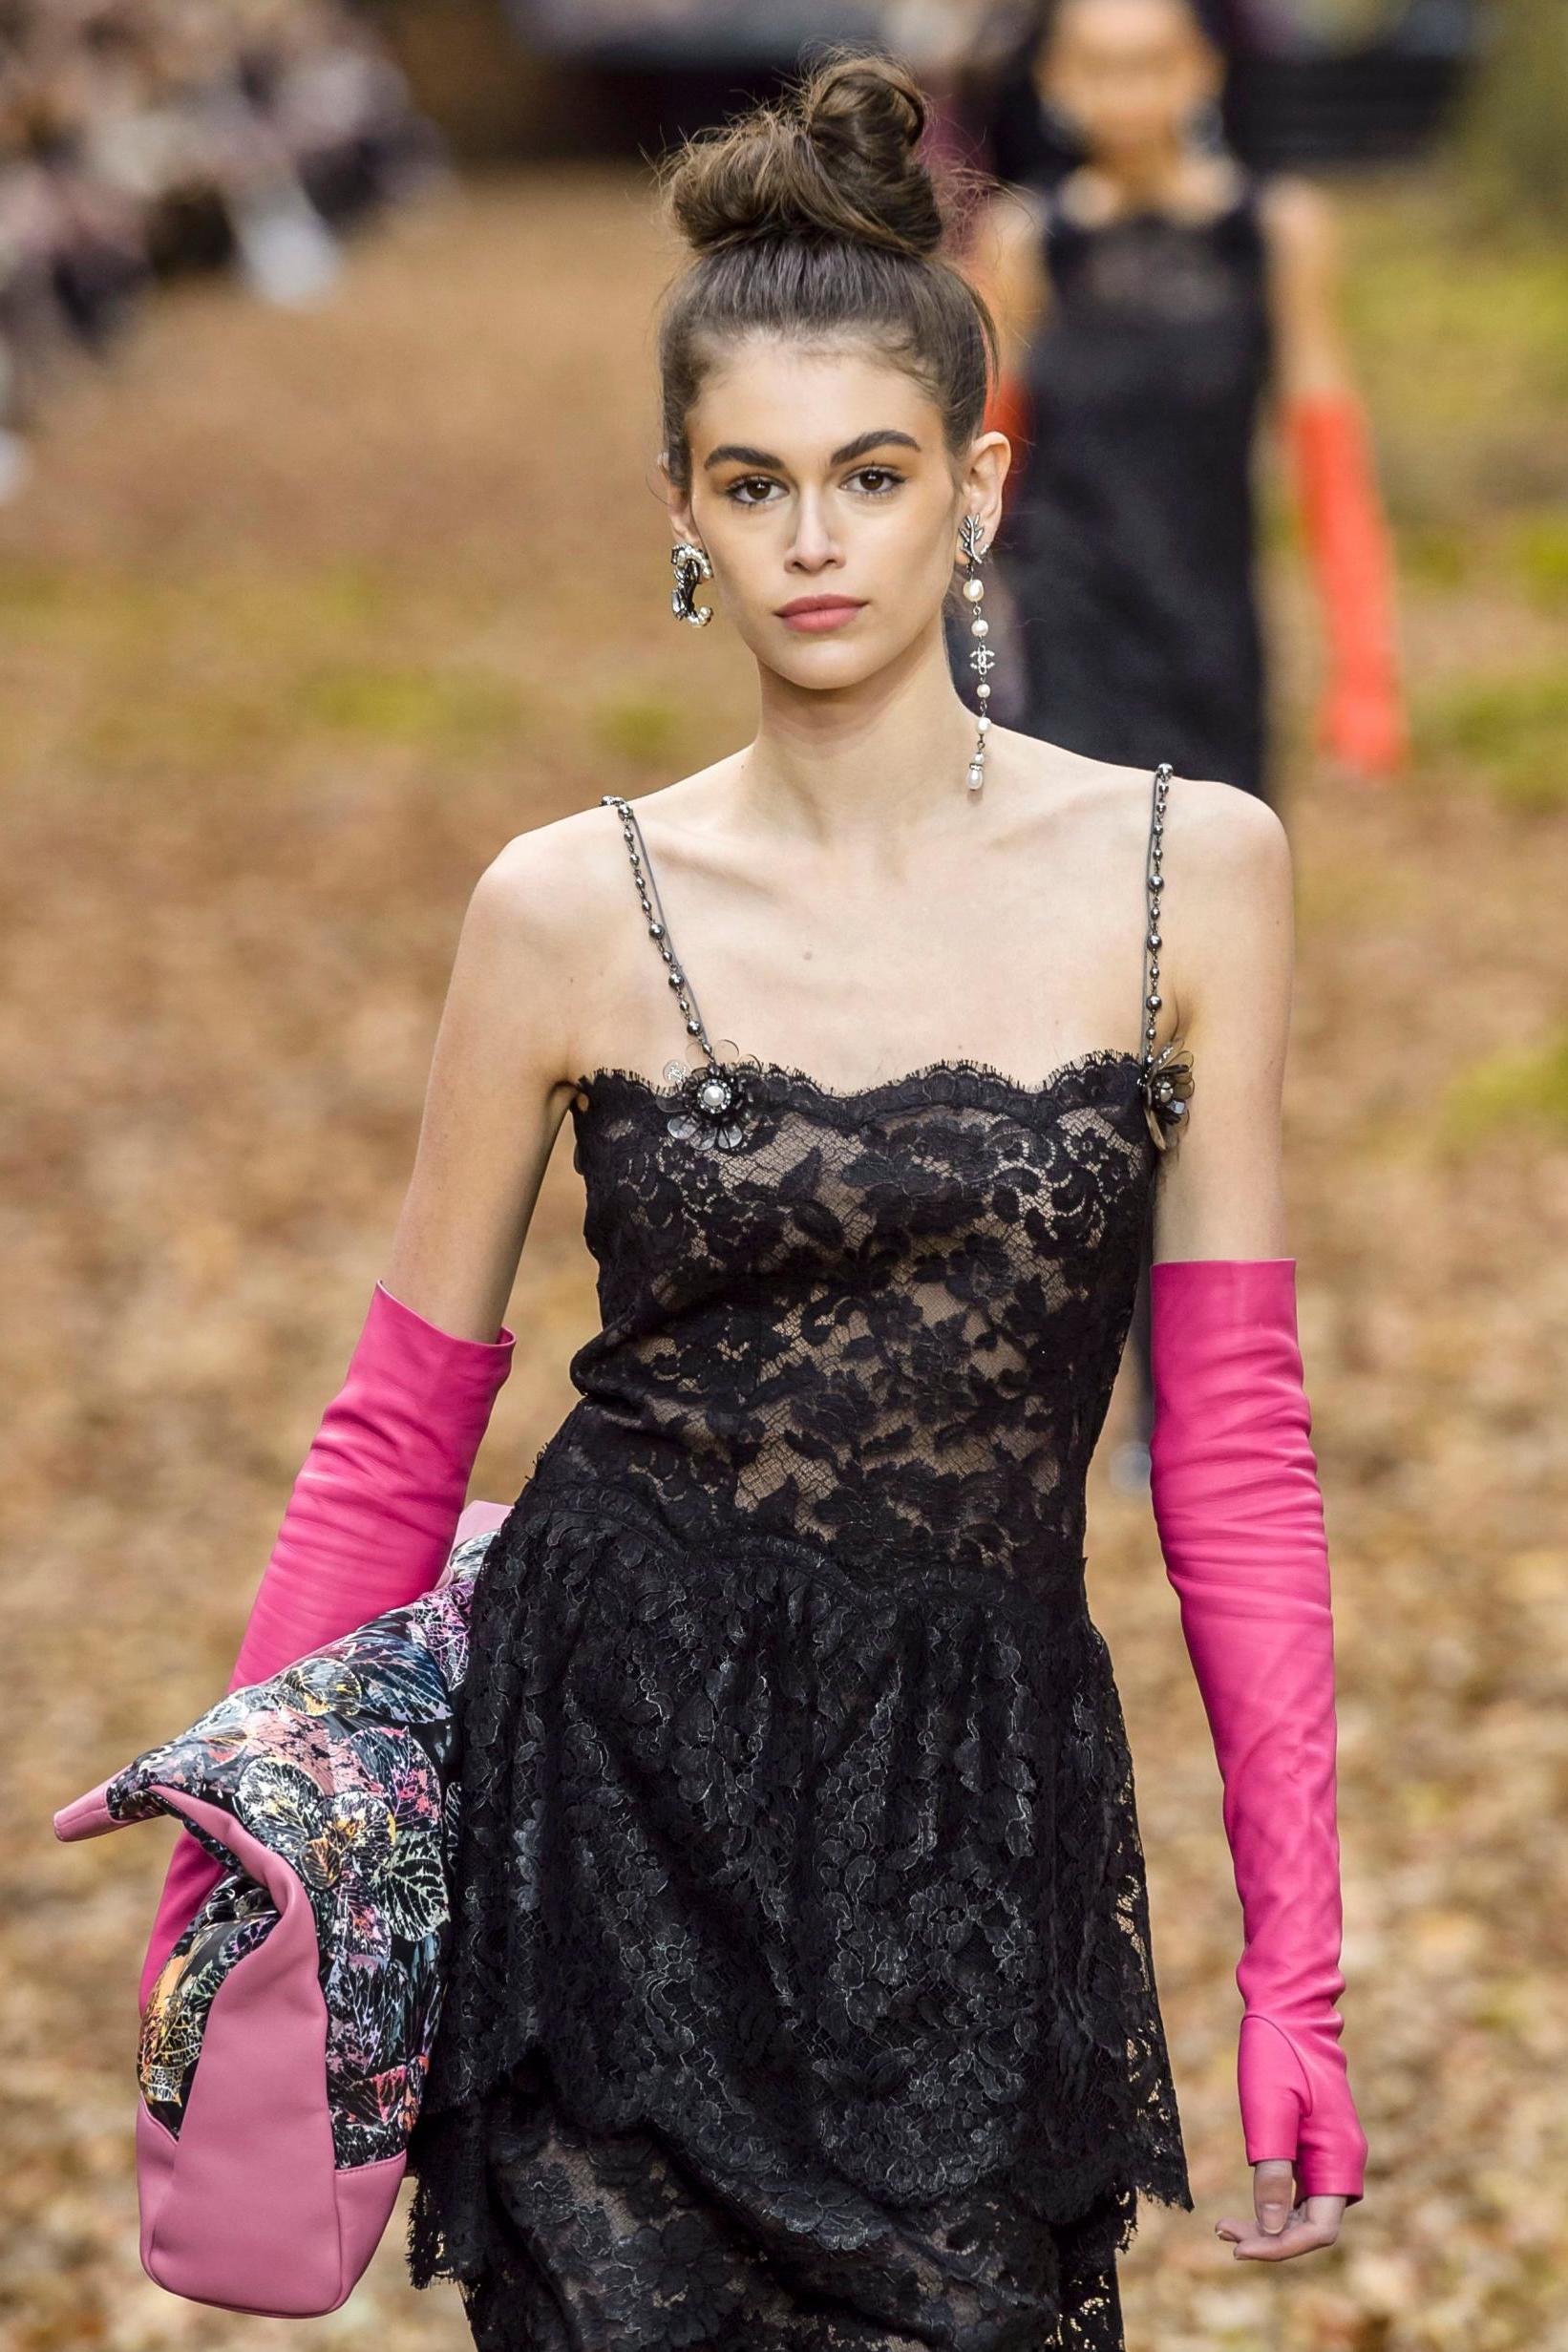 Gerber pictured on the Chanel runway in Paris for the French fashion house's autumn/winter 2018 show